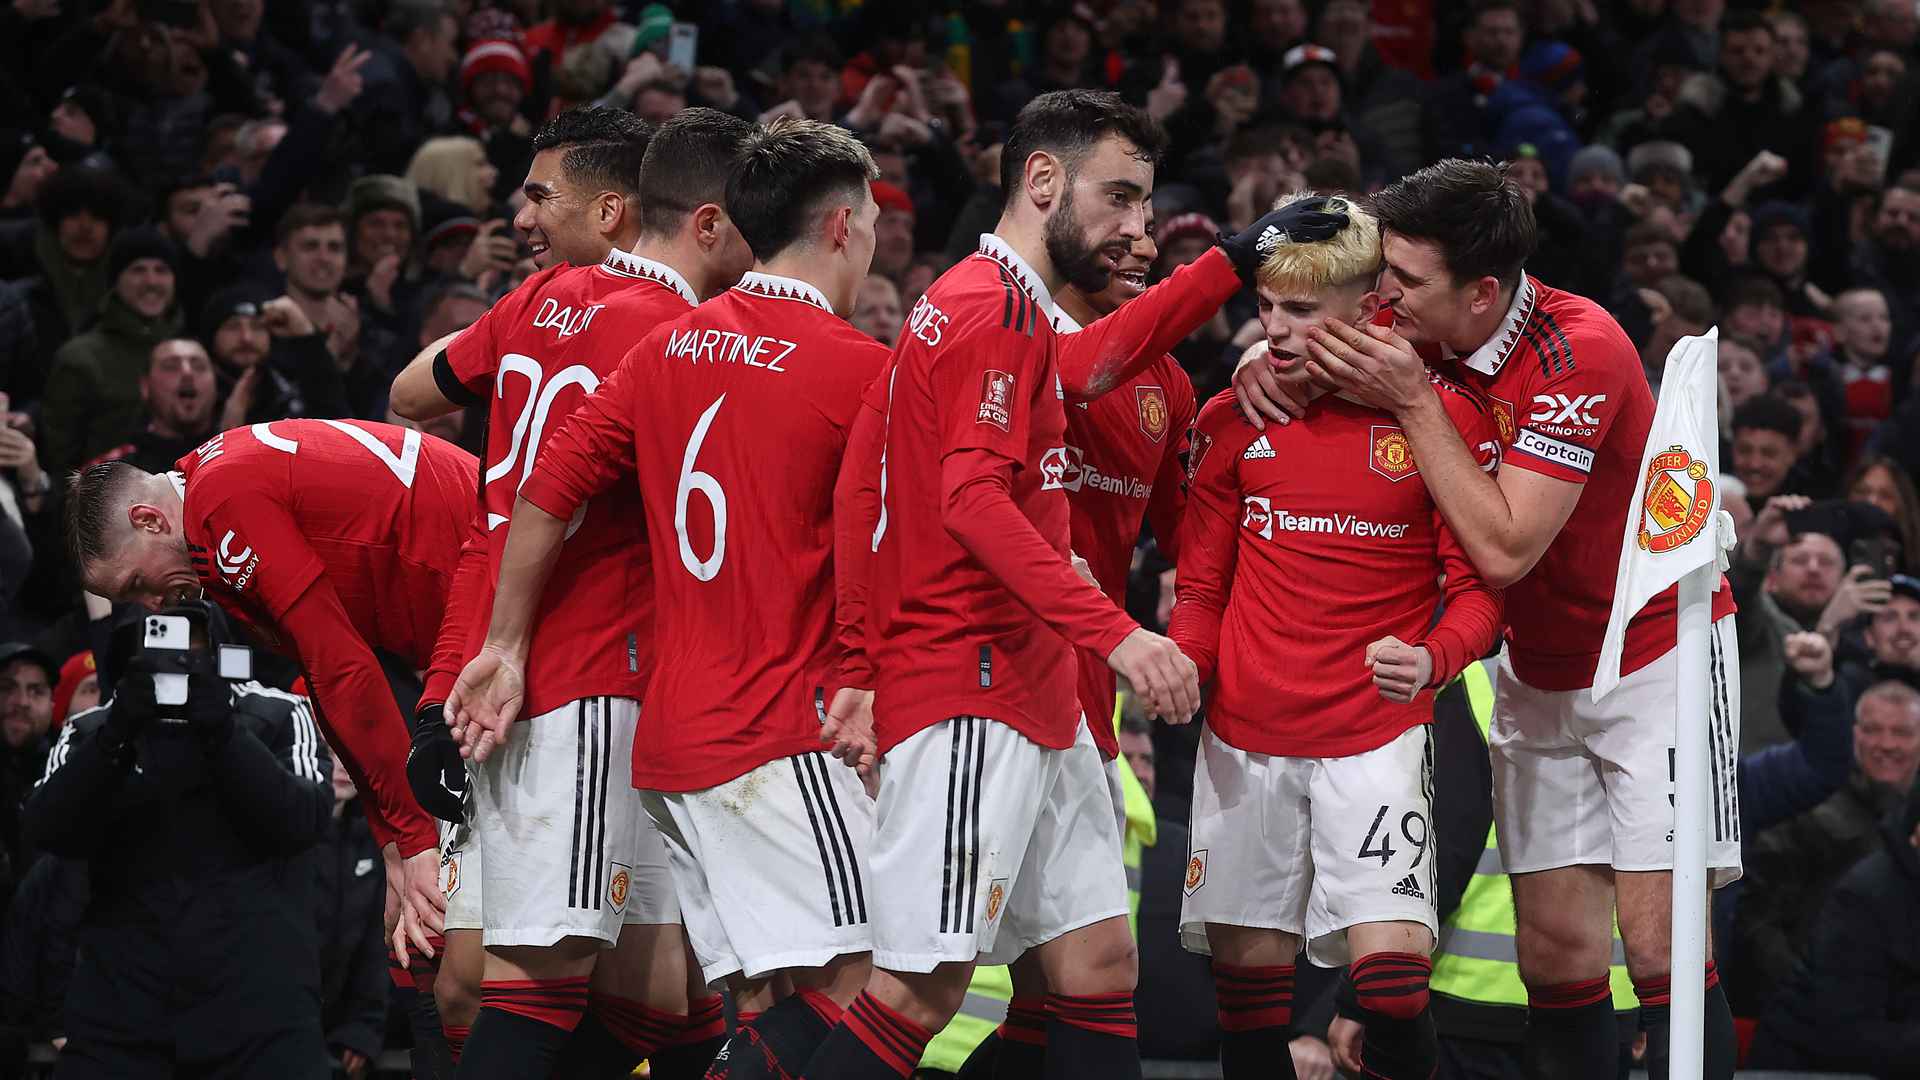 Match report and video highlights hub for Man Utd v West Ham | 1 March 2023